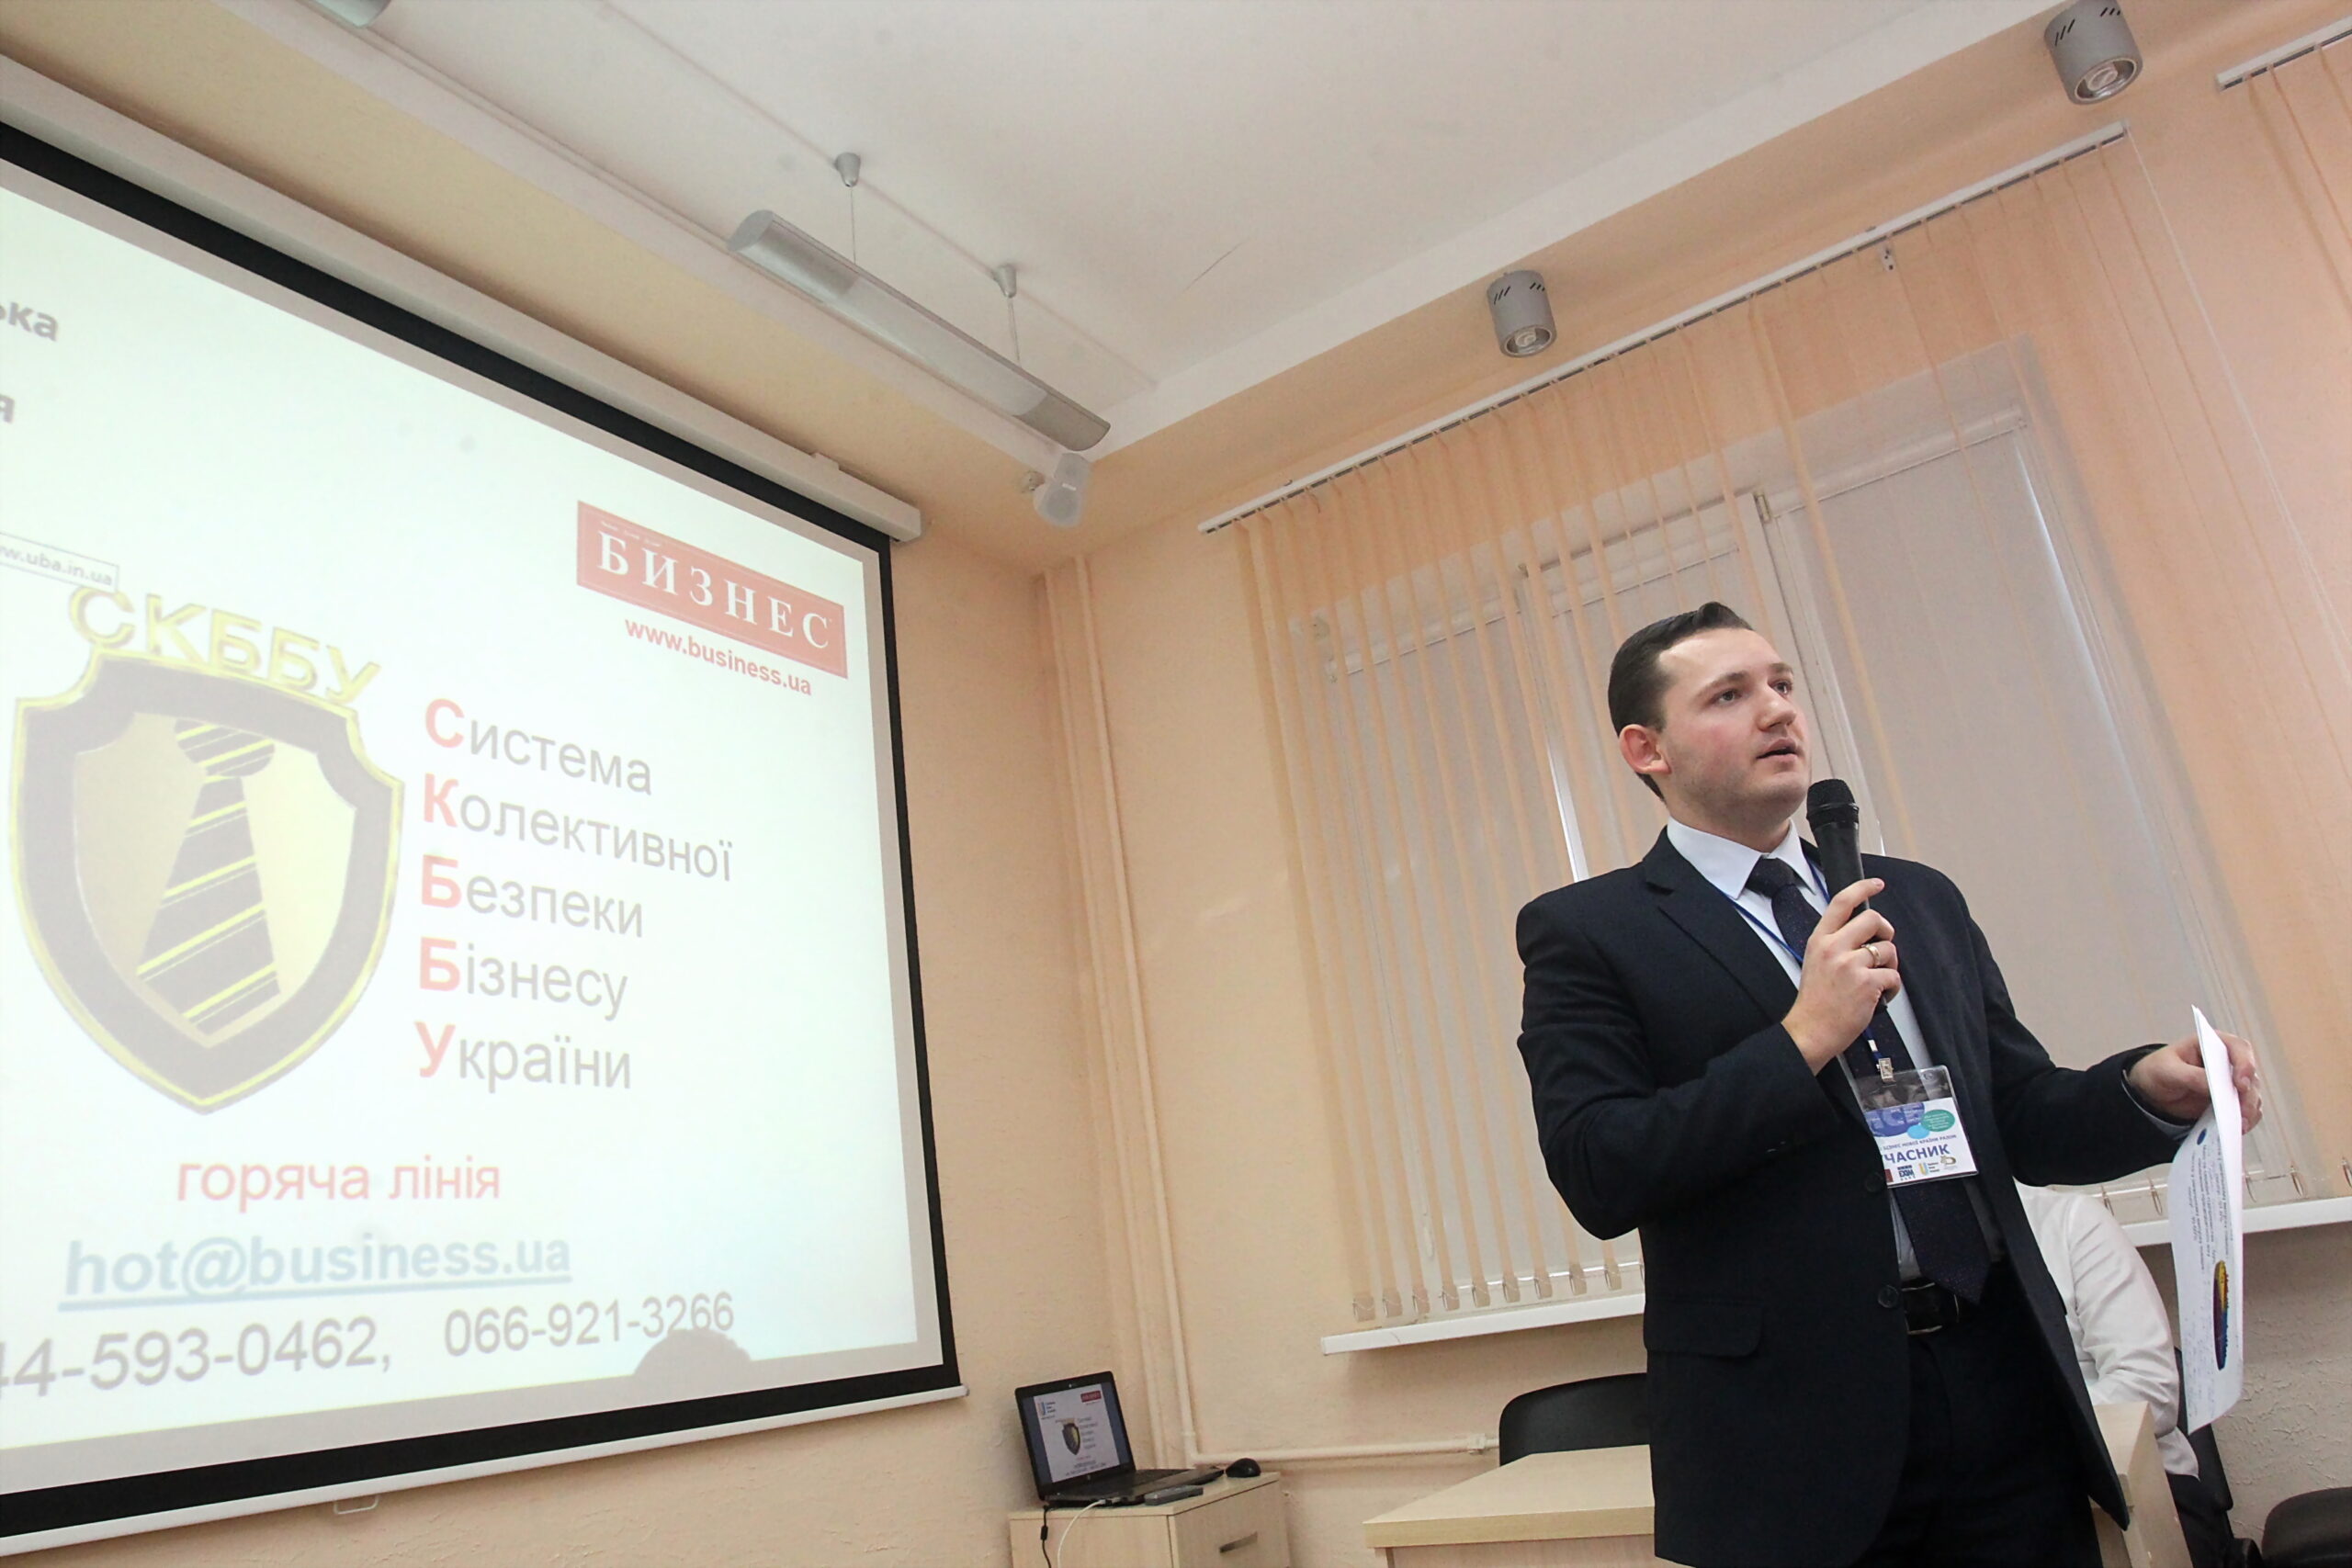 Yevgen Petrenko took part in the business conference in Dnipropetrovsk